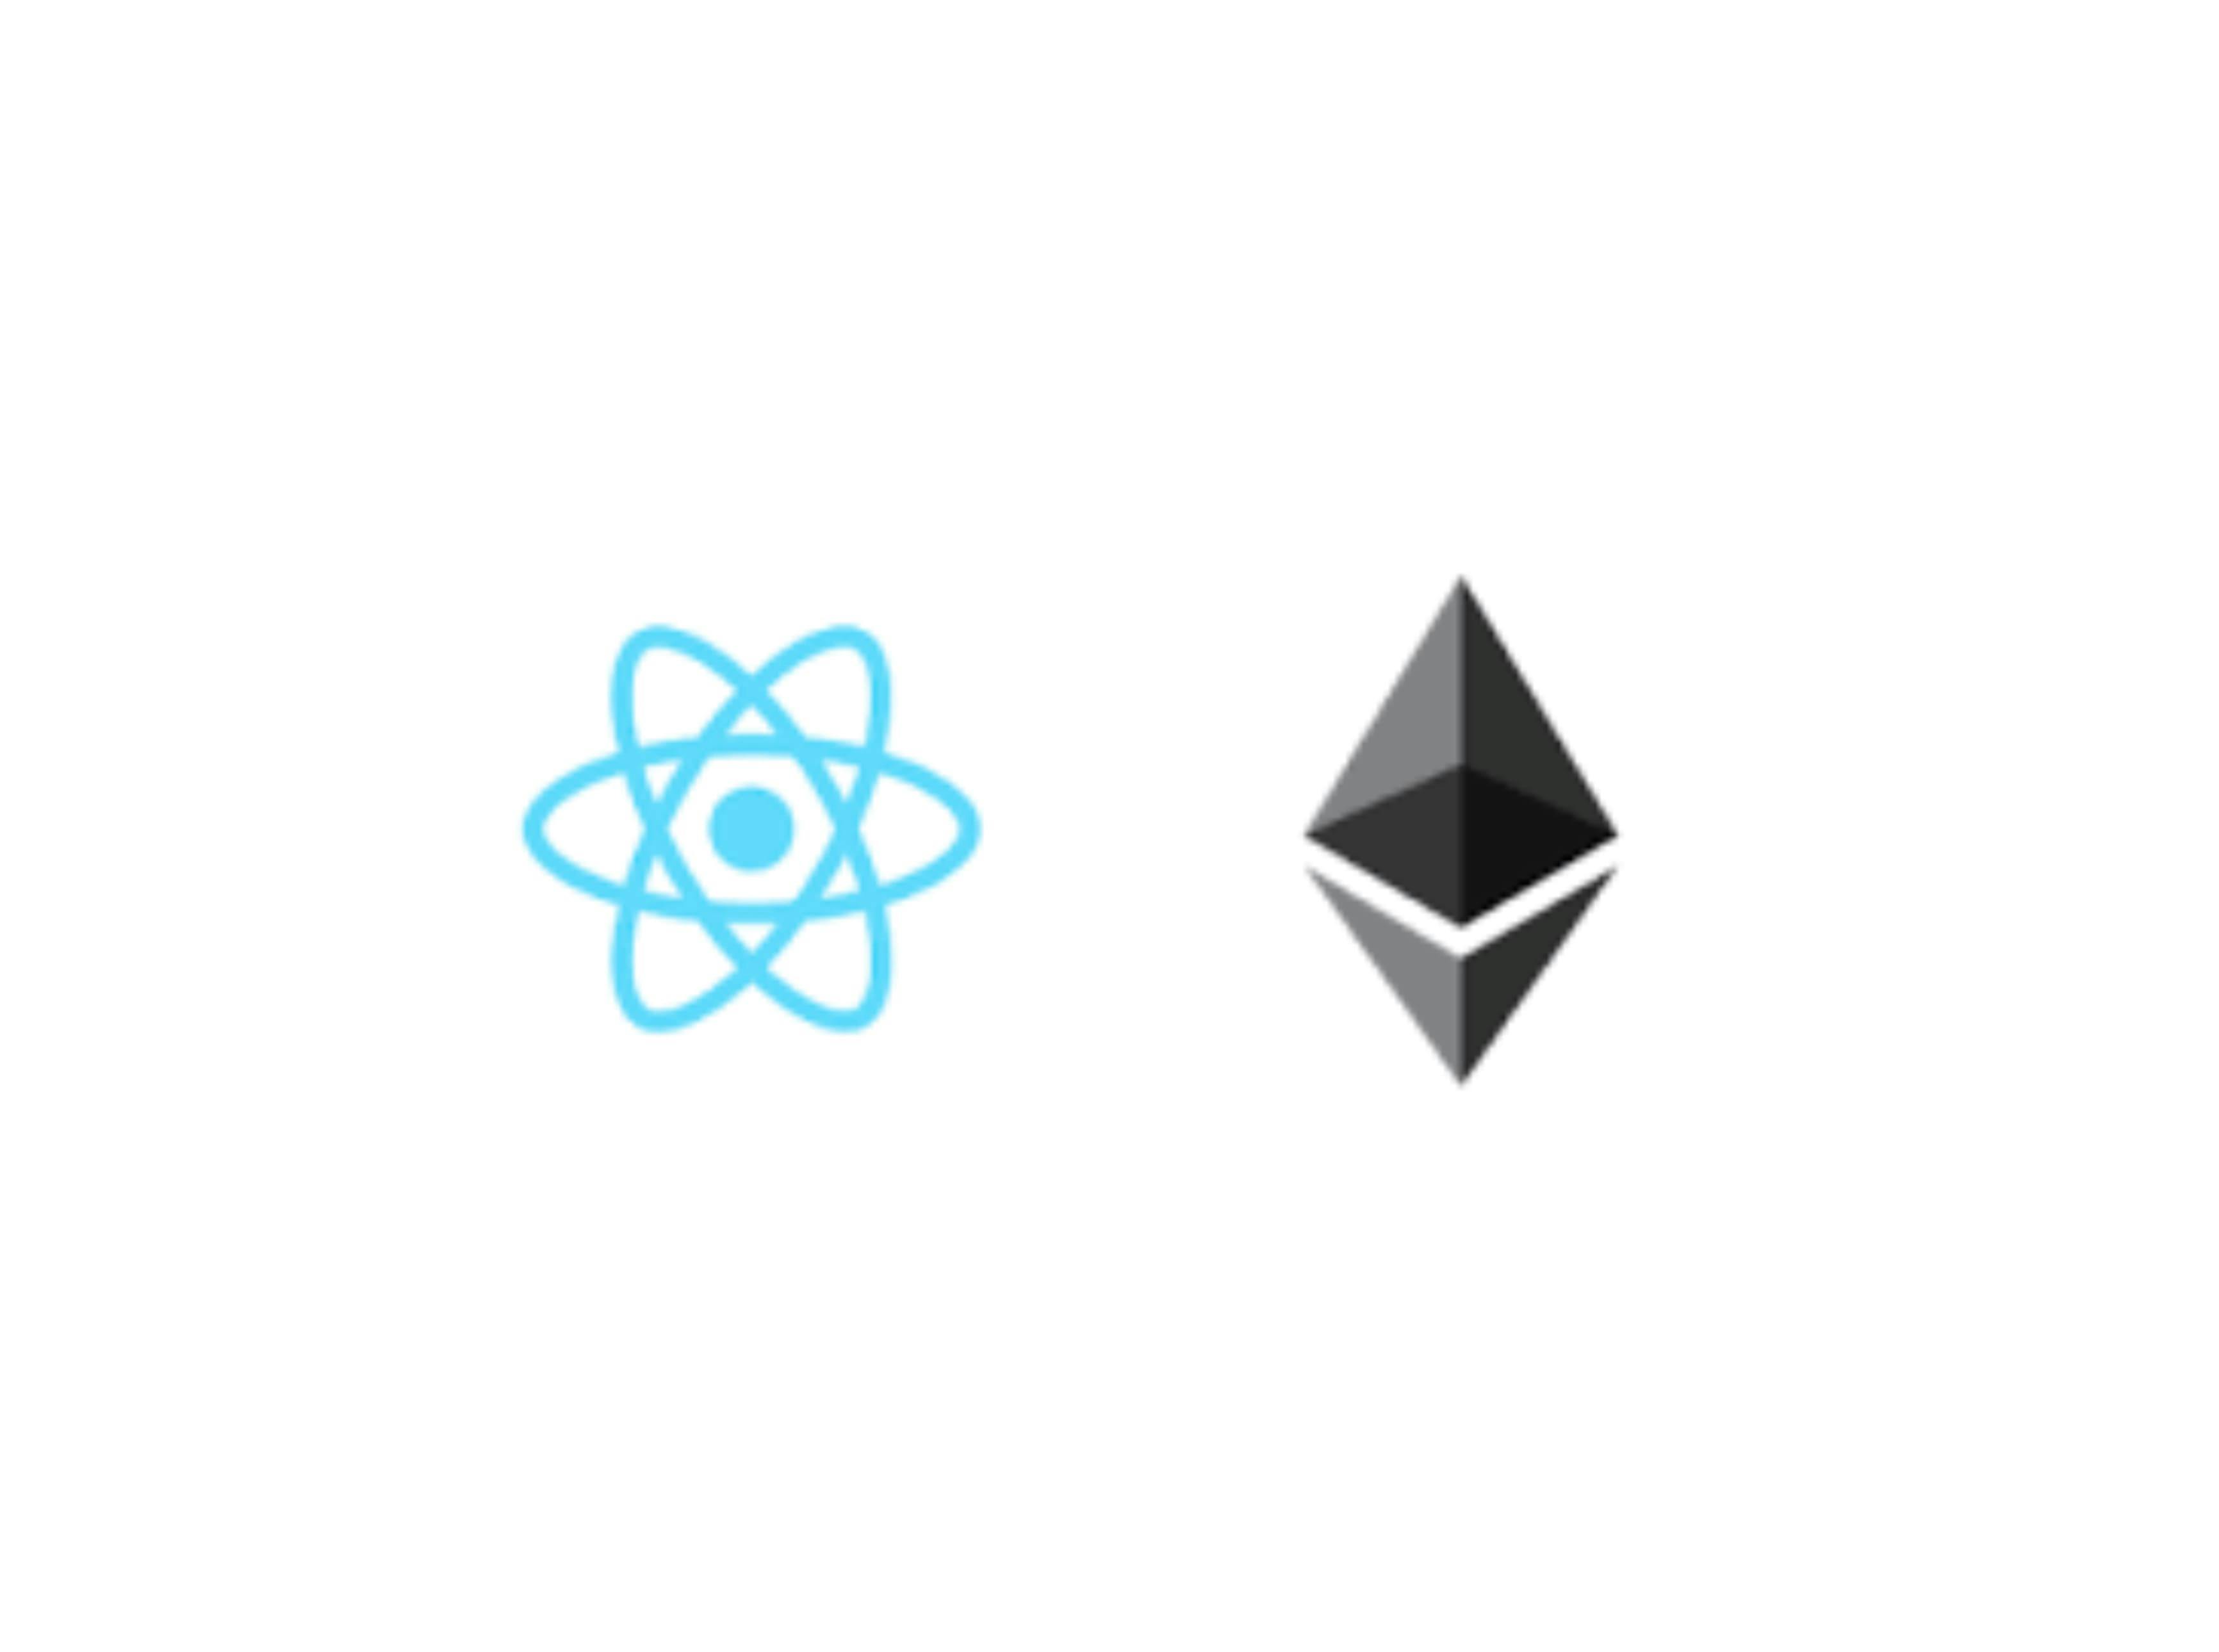 Building DApps with React and Solidity on Ethereum